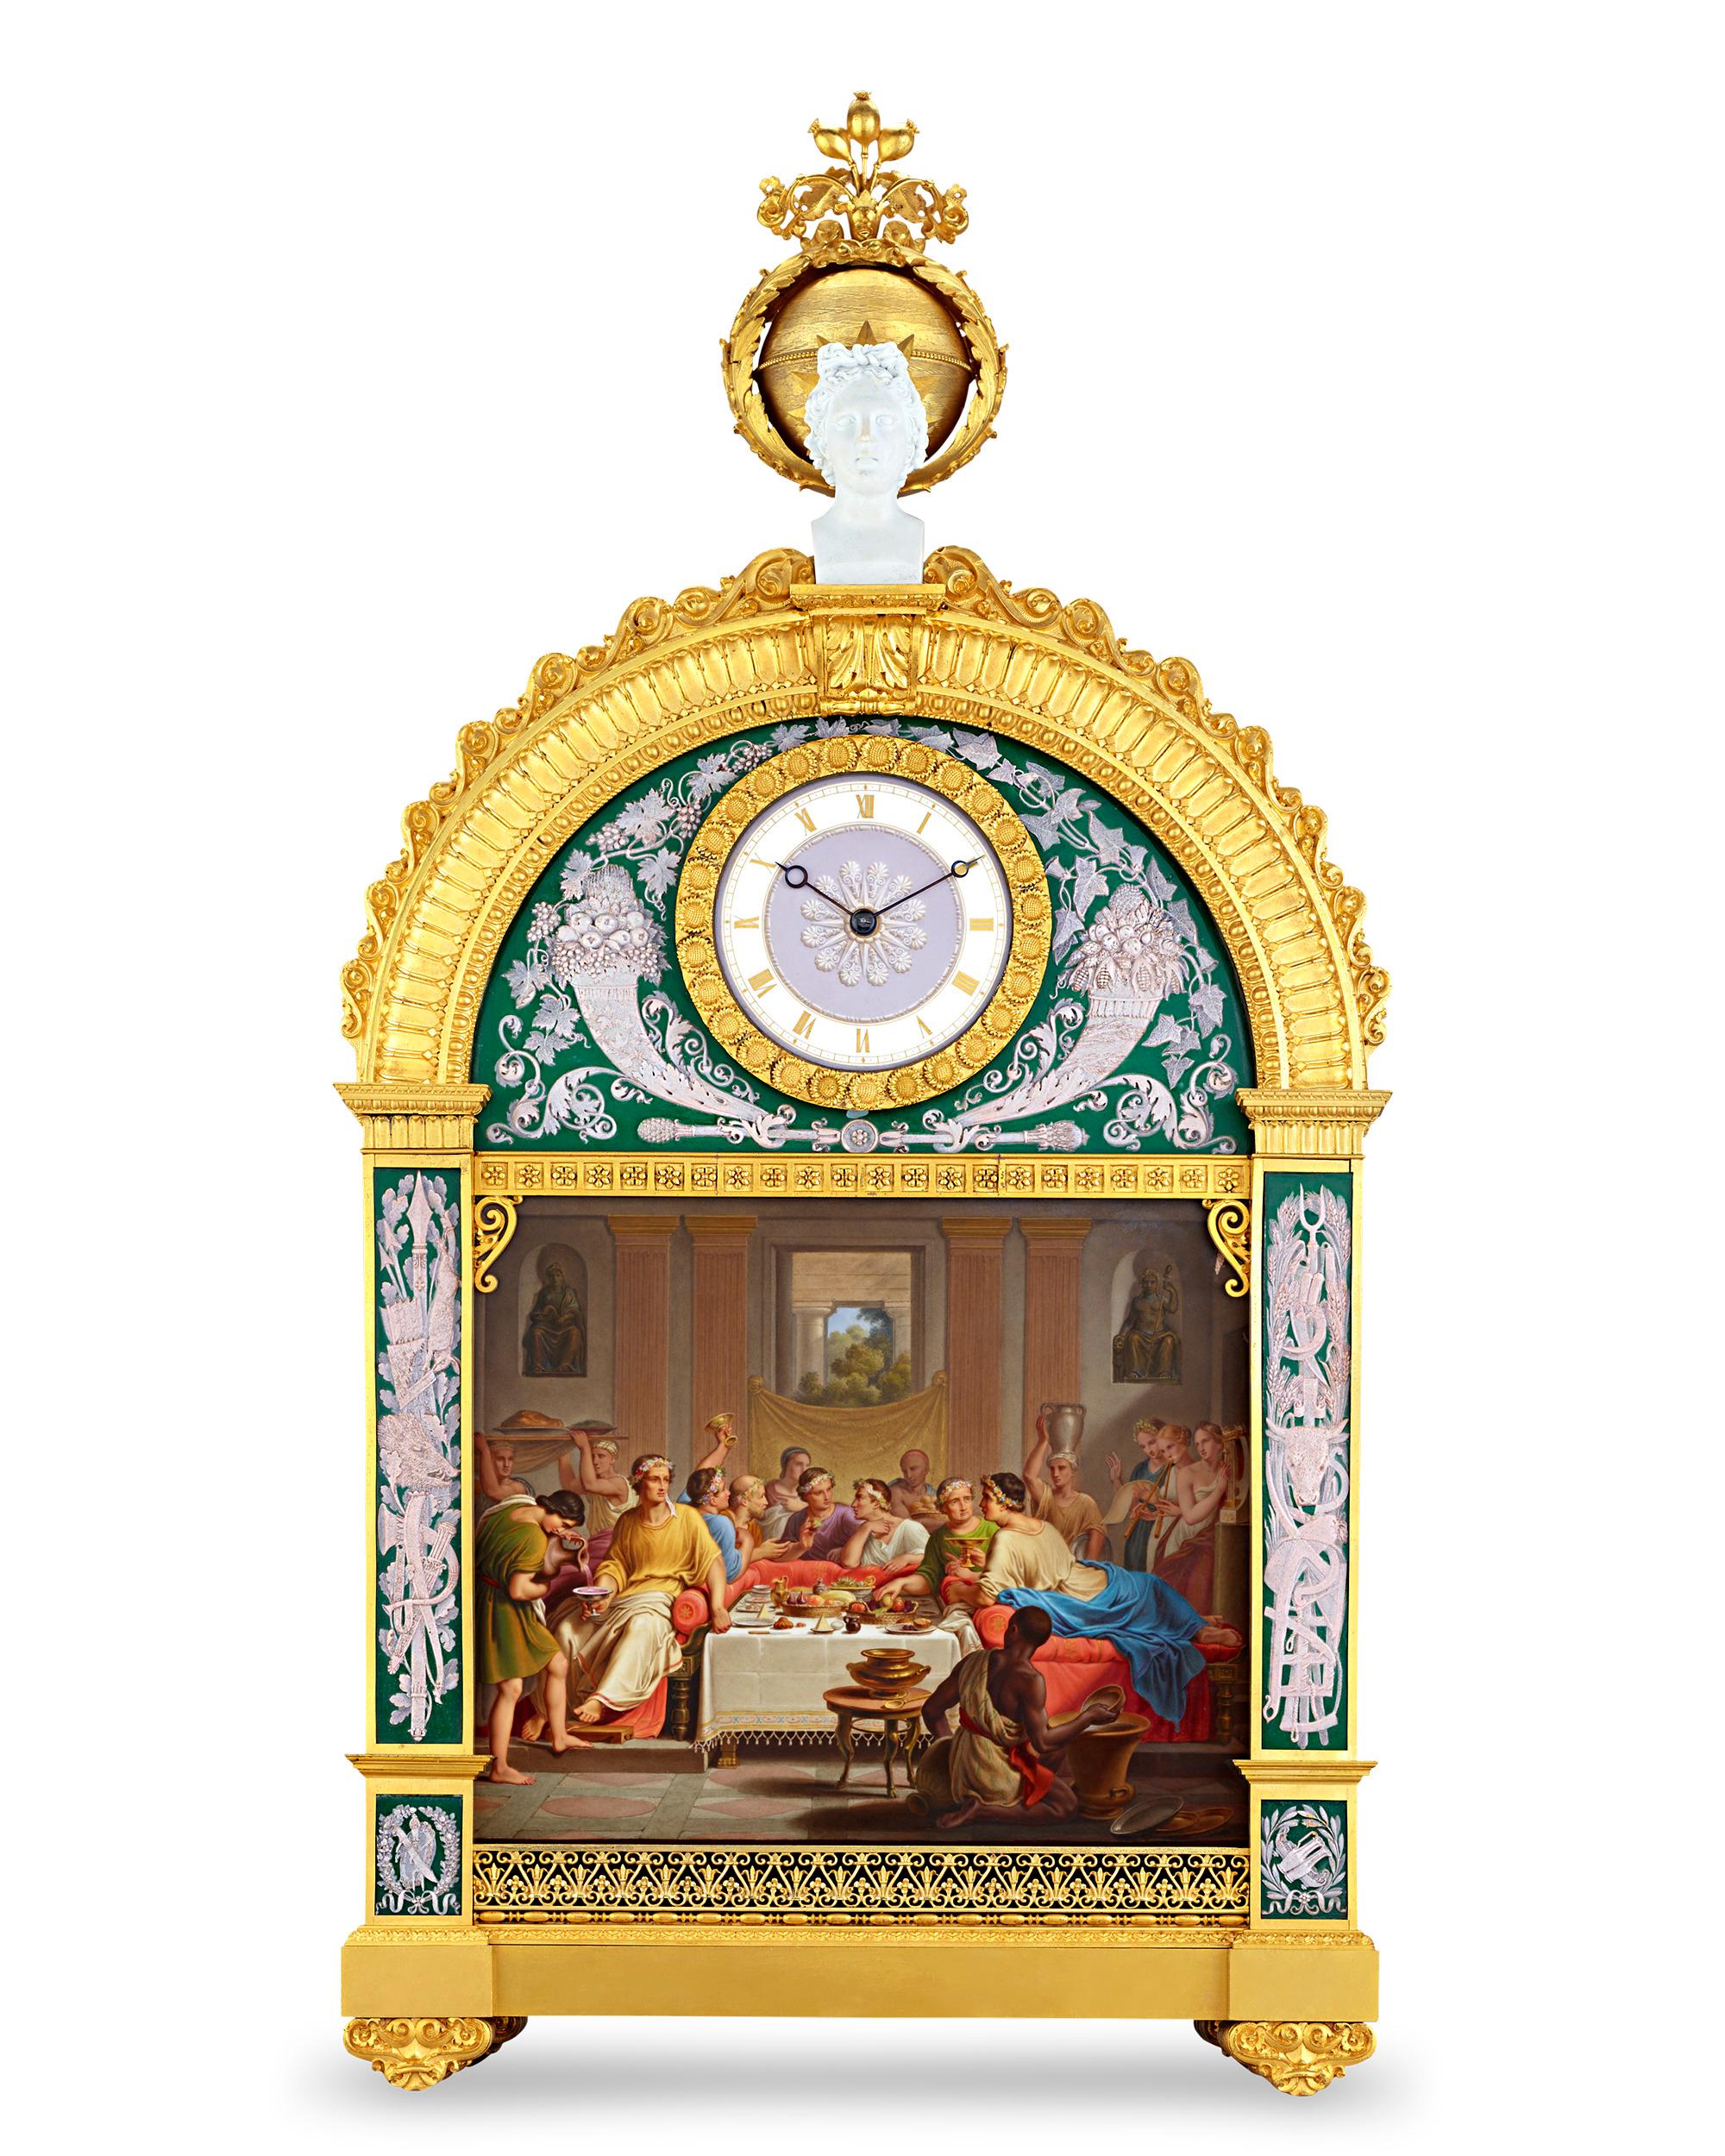 Originally commissioned by King Louis Philippe I of France for his Palace of Saint Cloud, this magnificent mantel clock is a horological marvel. As functional as it is beautiful, the clockwork features a fourteen-day running train with a Graham